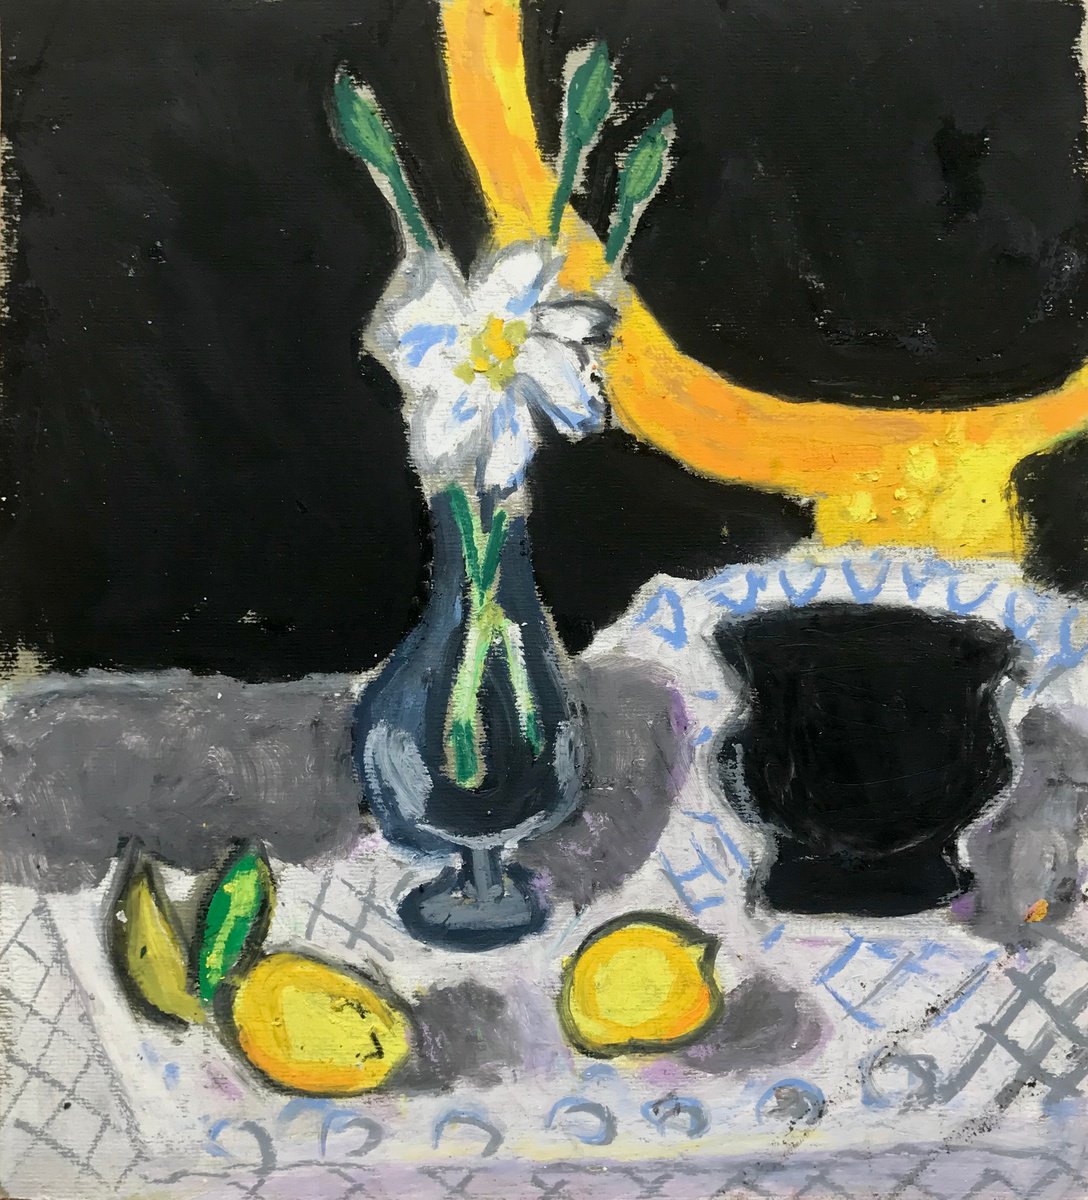 Mirror, Flower And Lemon by Milica Radovic